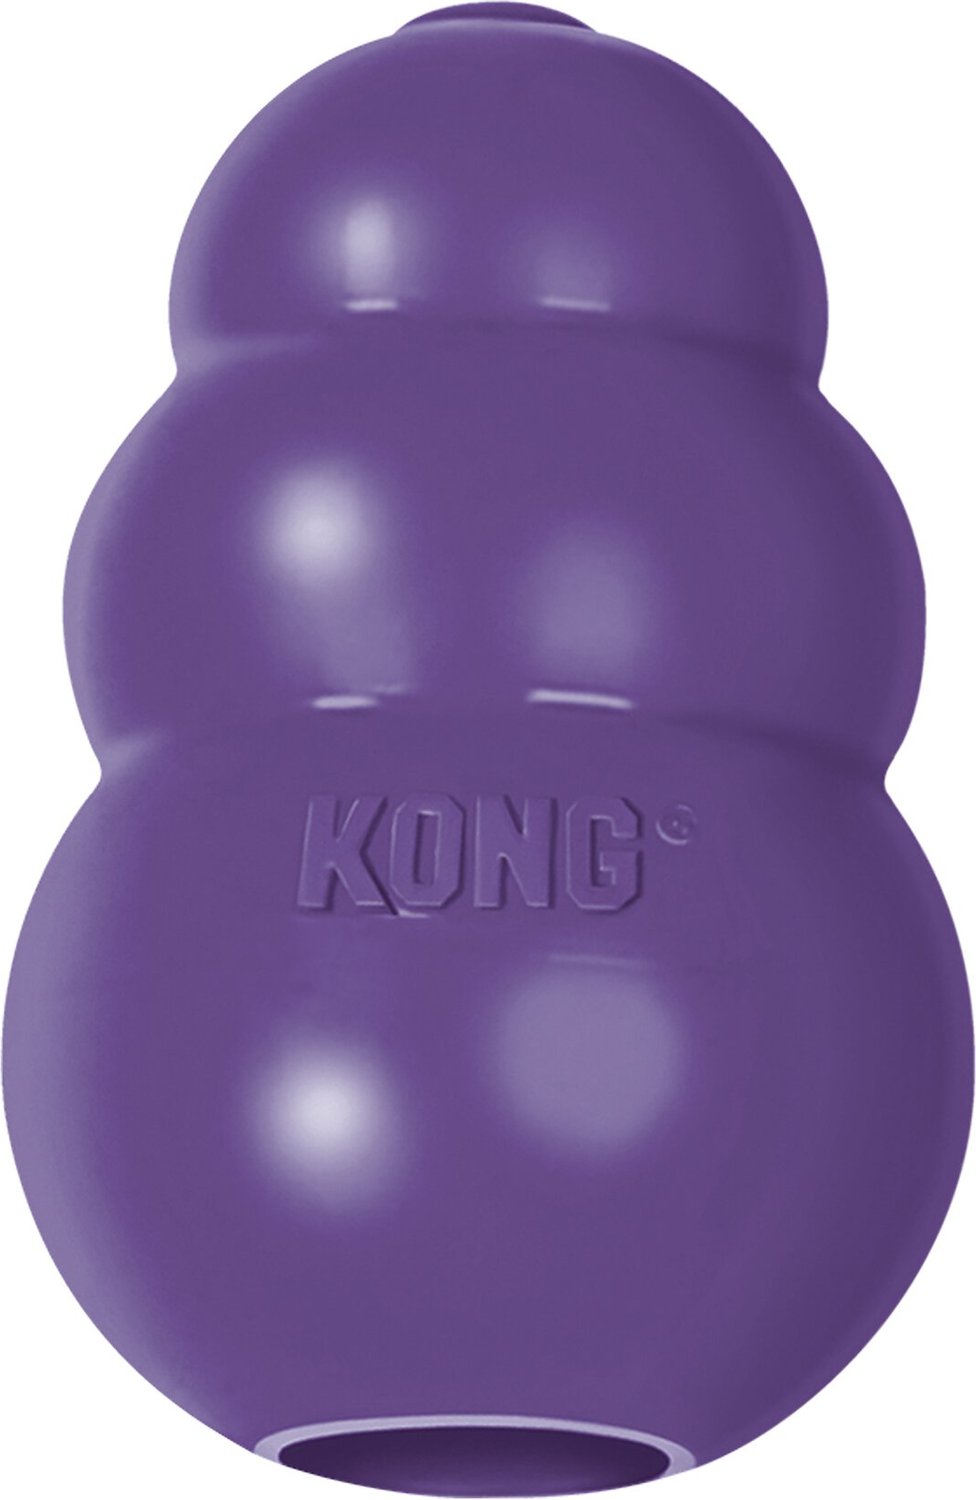 the kong dog toy